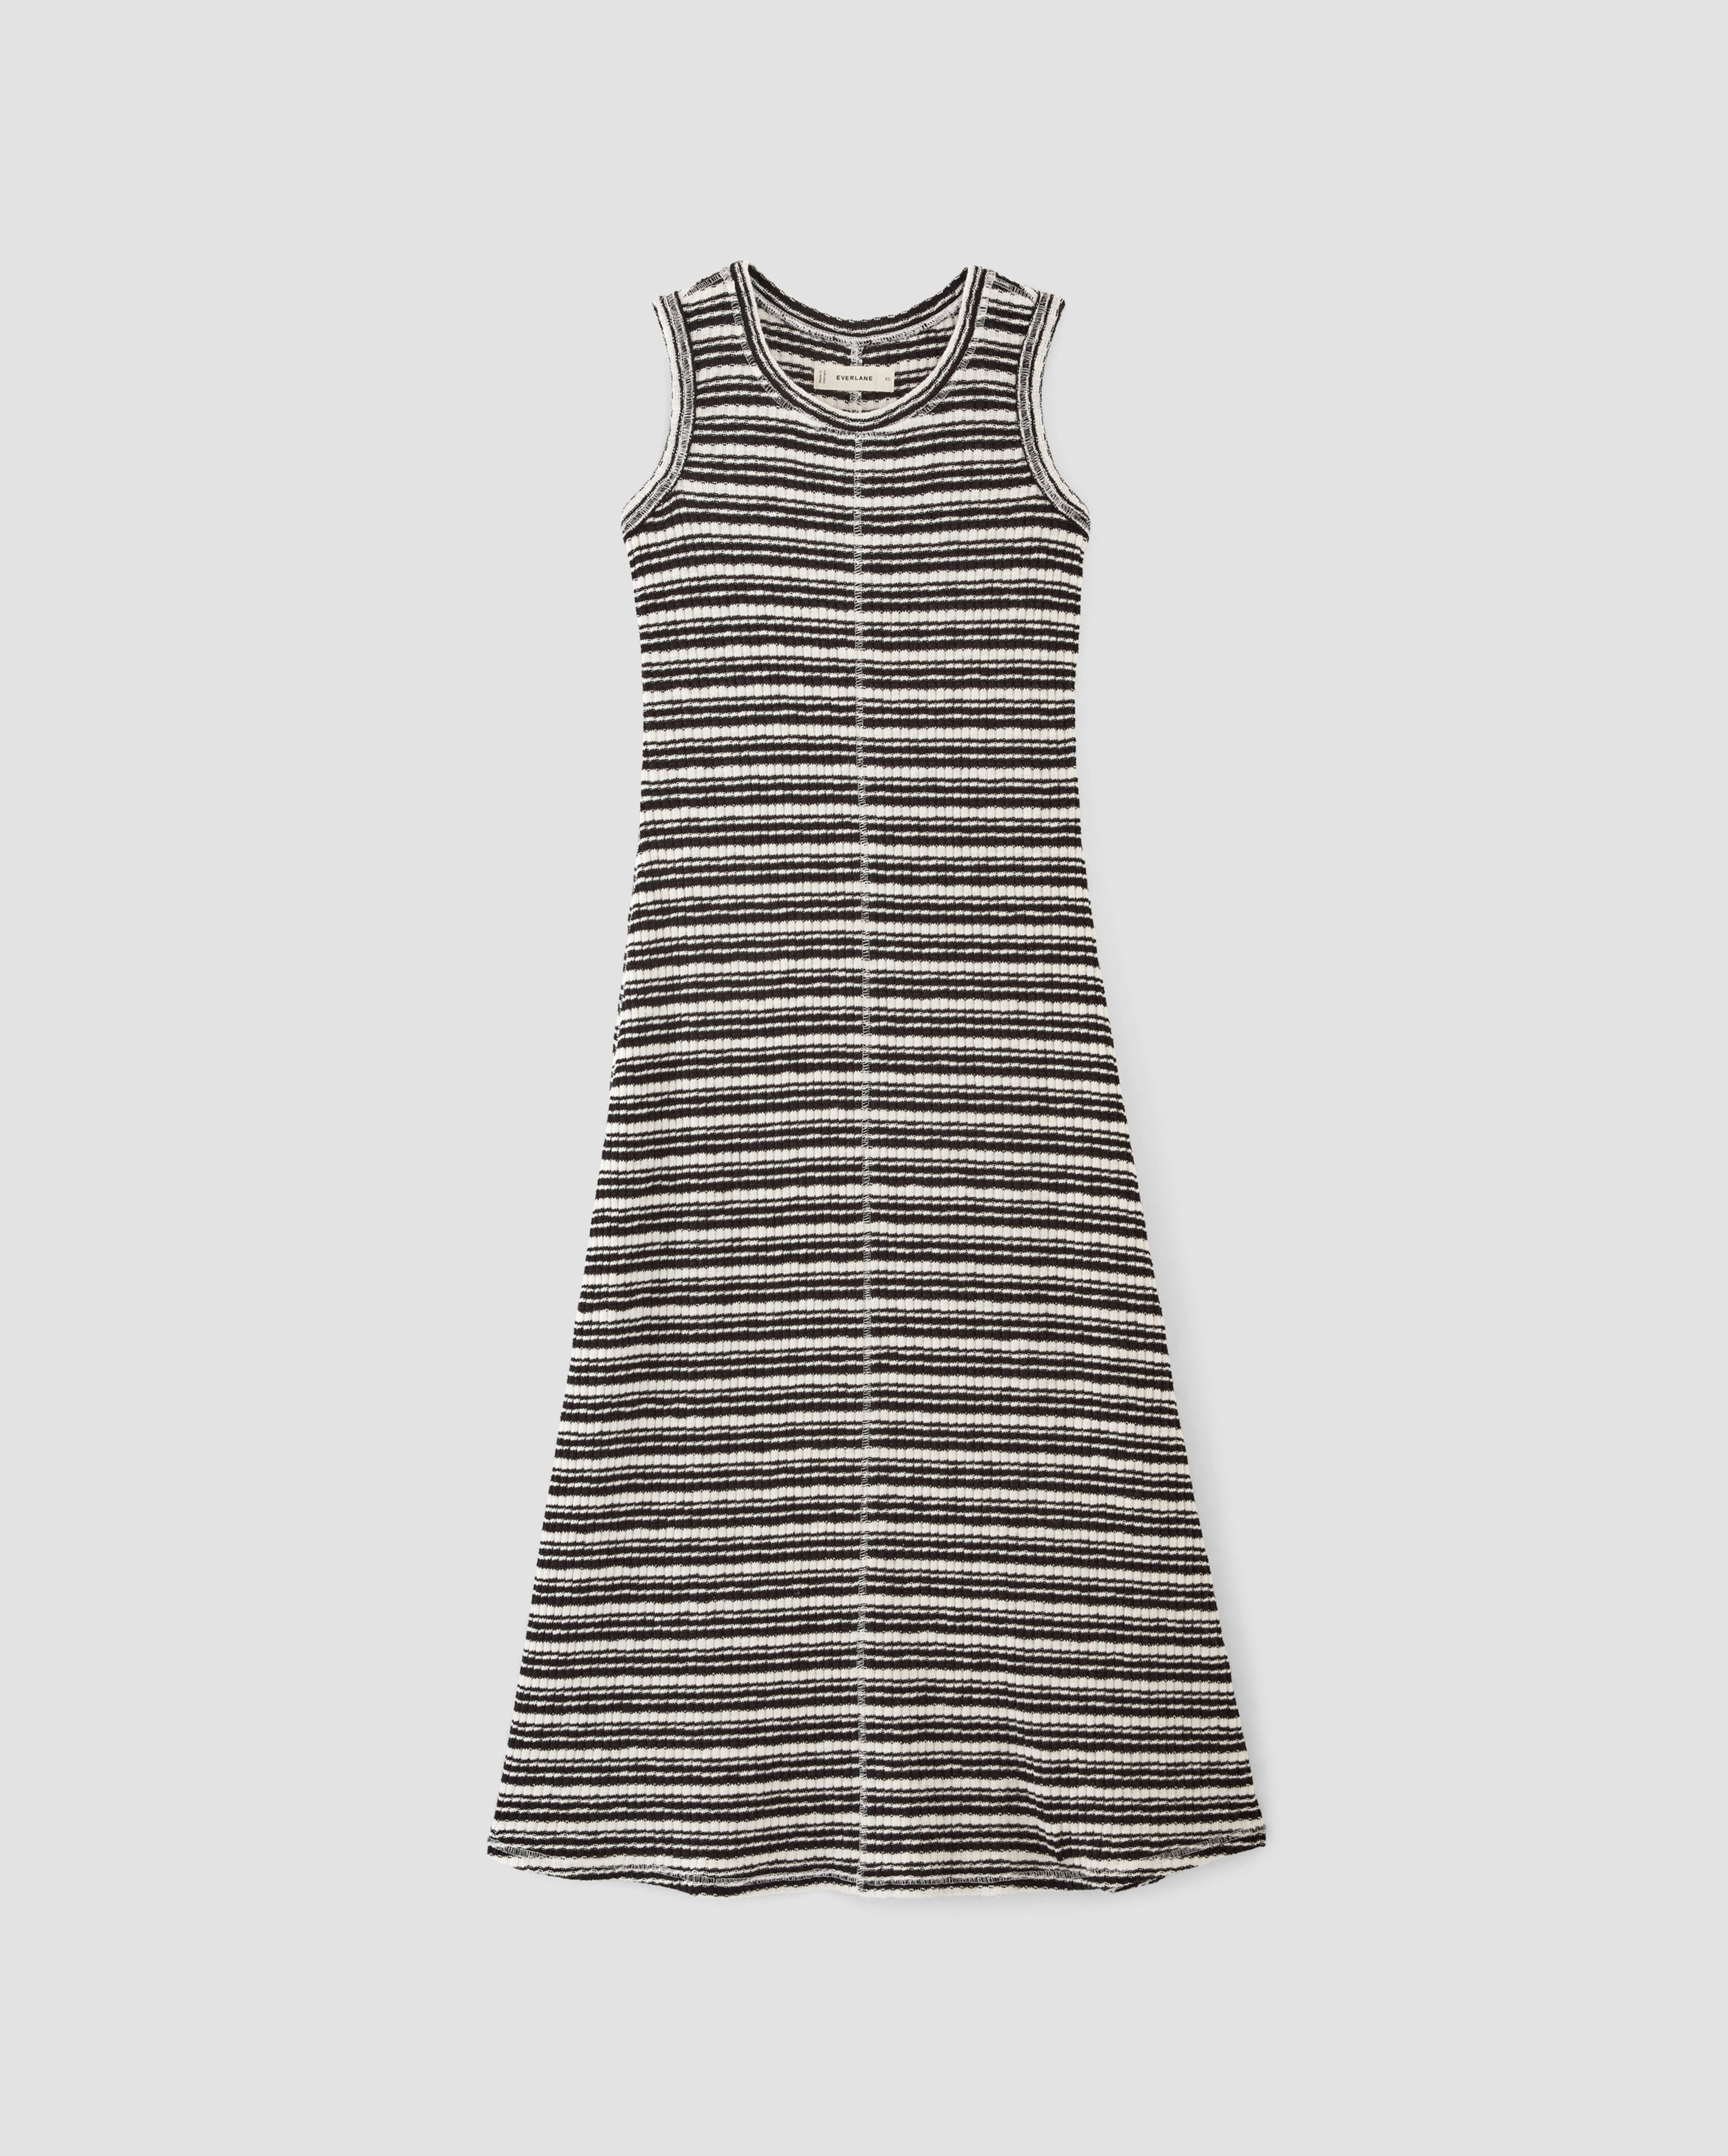 Everlane NWT The Ribbed Tank Dress in Beech Size L - $60 New With